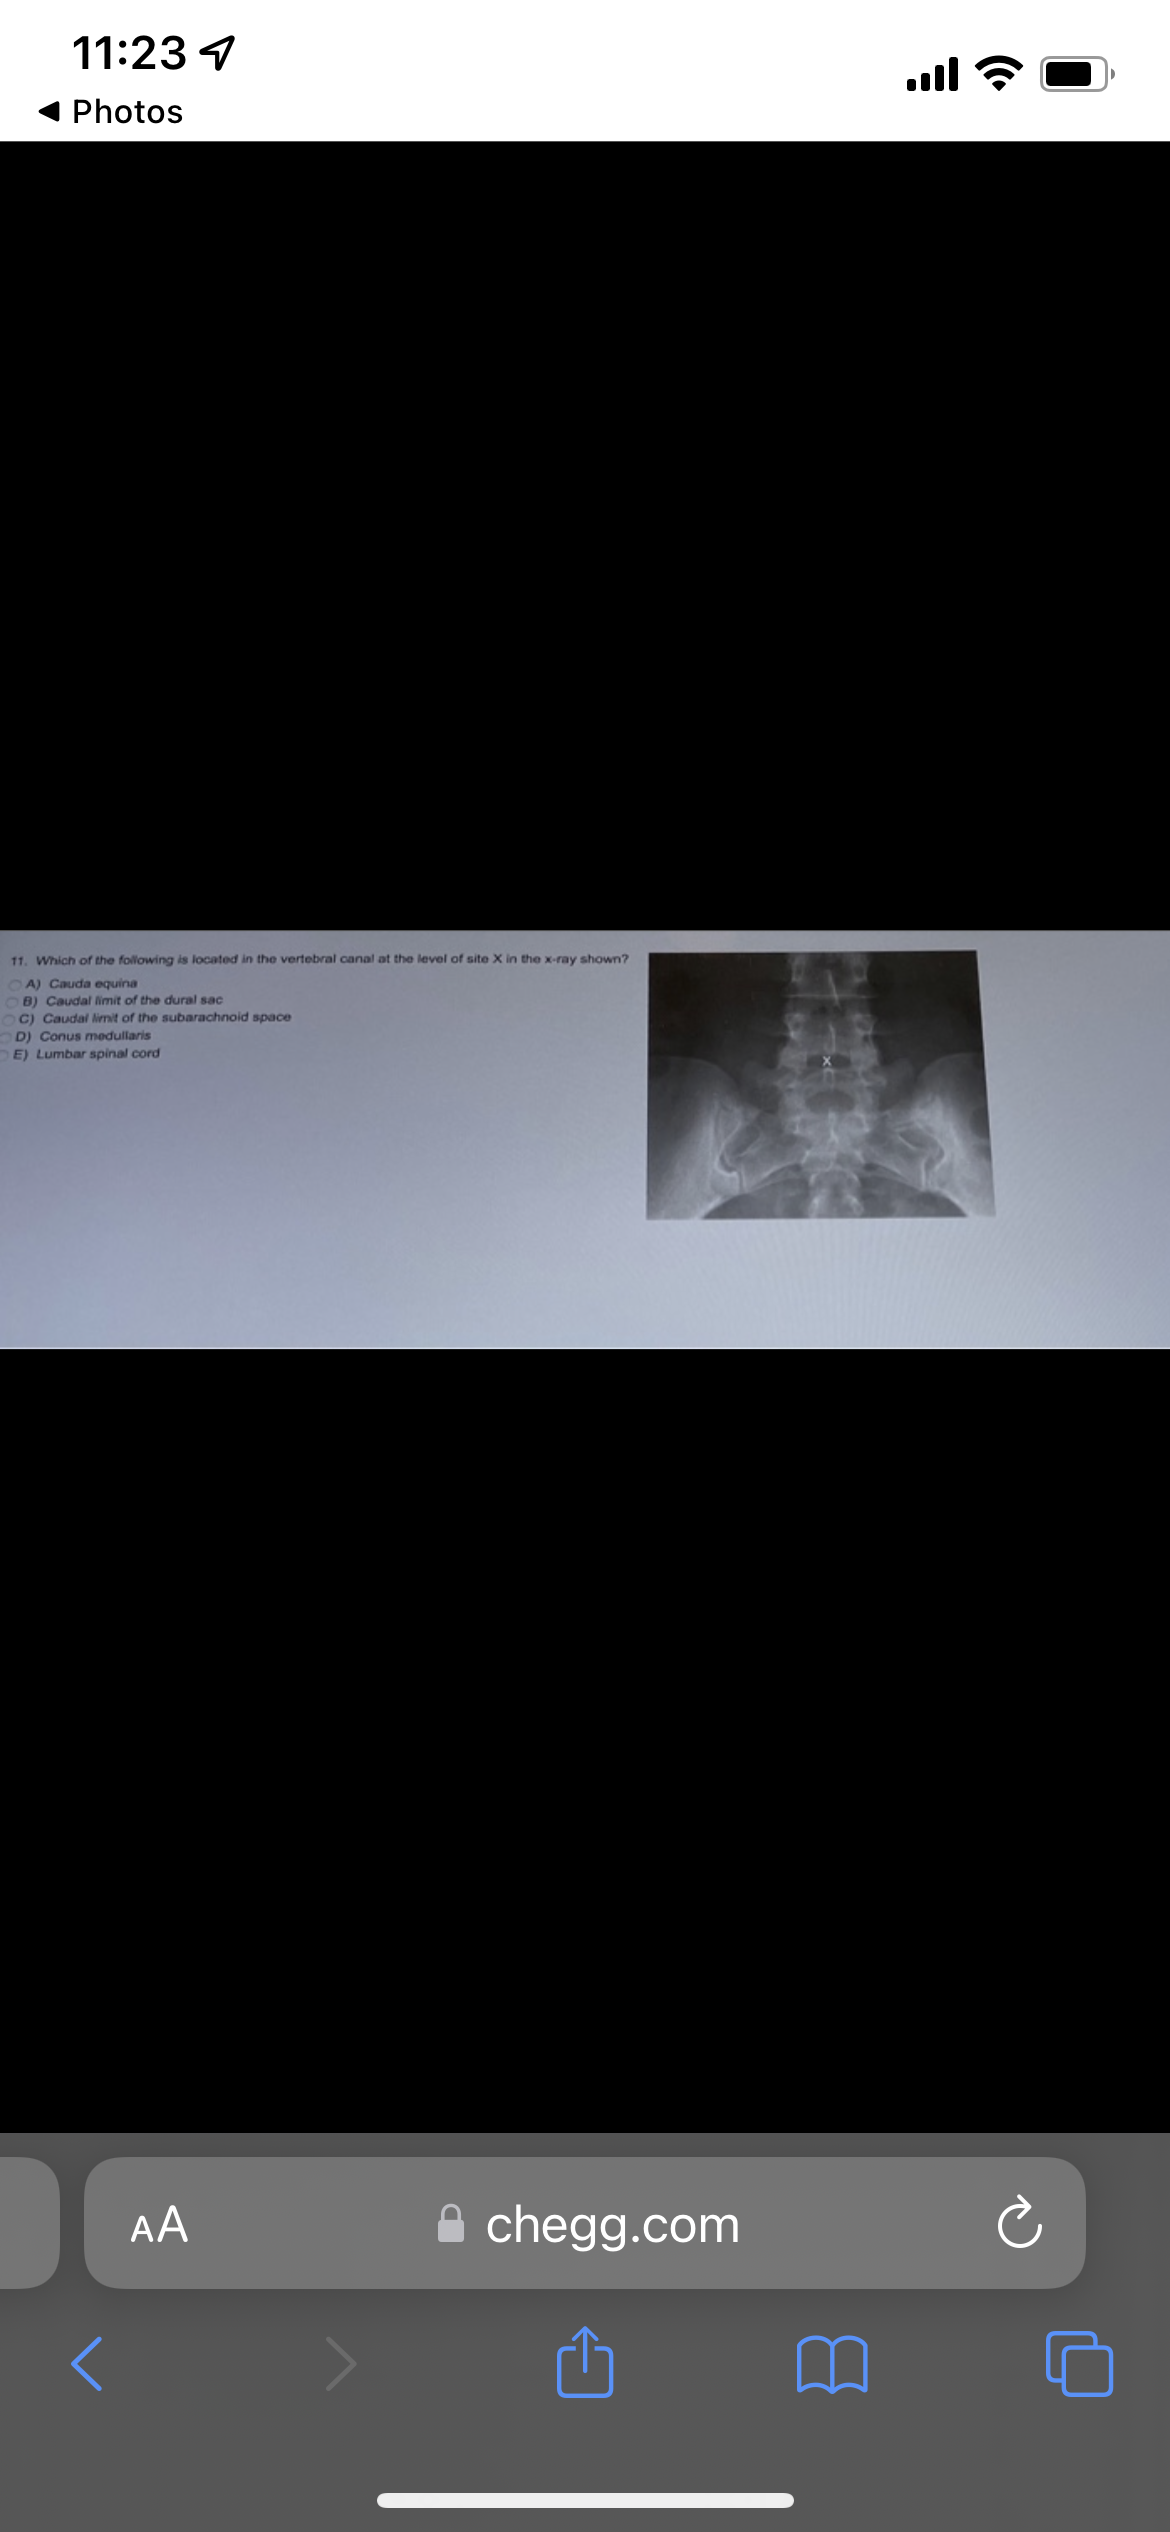 11:23 7
Photos
11. Which of the following is located in the vertebral canal at the level of site X in the x-ray shown?
A) Cauda equina
OB) Caudal limit of the dural sac
C) Caudal limit of the subarachnoid space
D) Conus medullaris
E) Lumbar spinal cord
AA
<
chegg.com
....